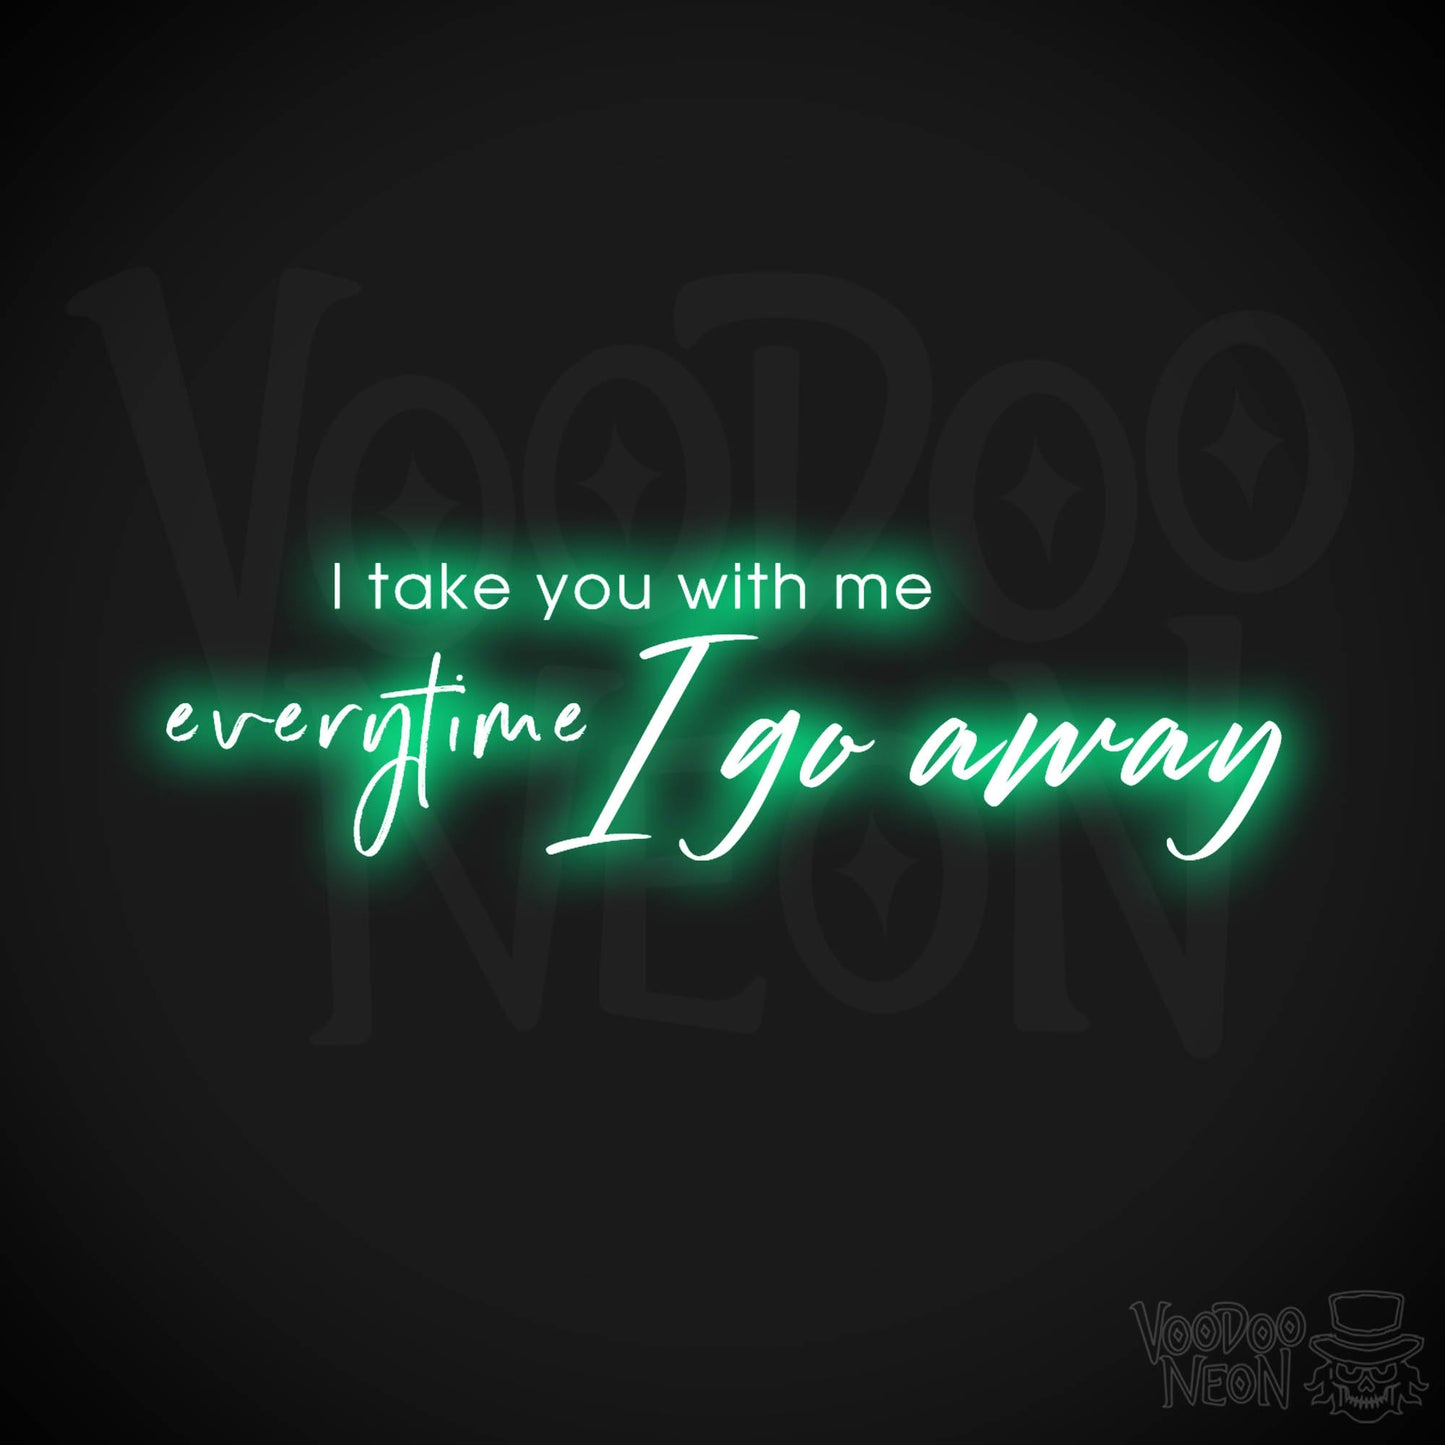 I Take You With Me Every Time You Go Away Neon Sign - LED Wall Art - Color Green